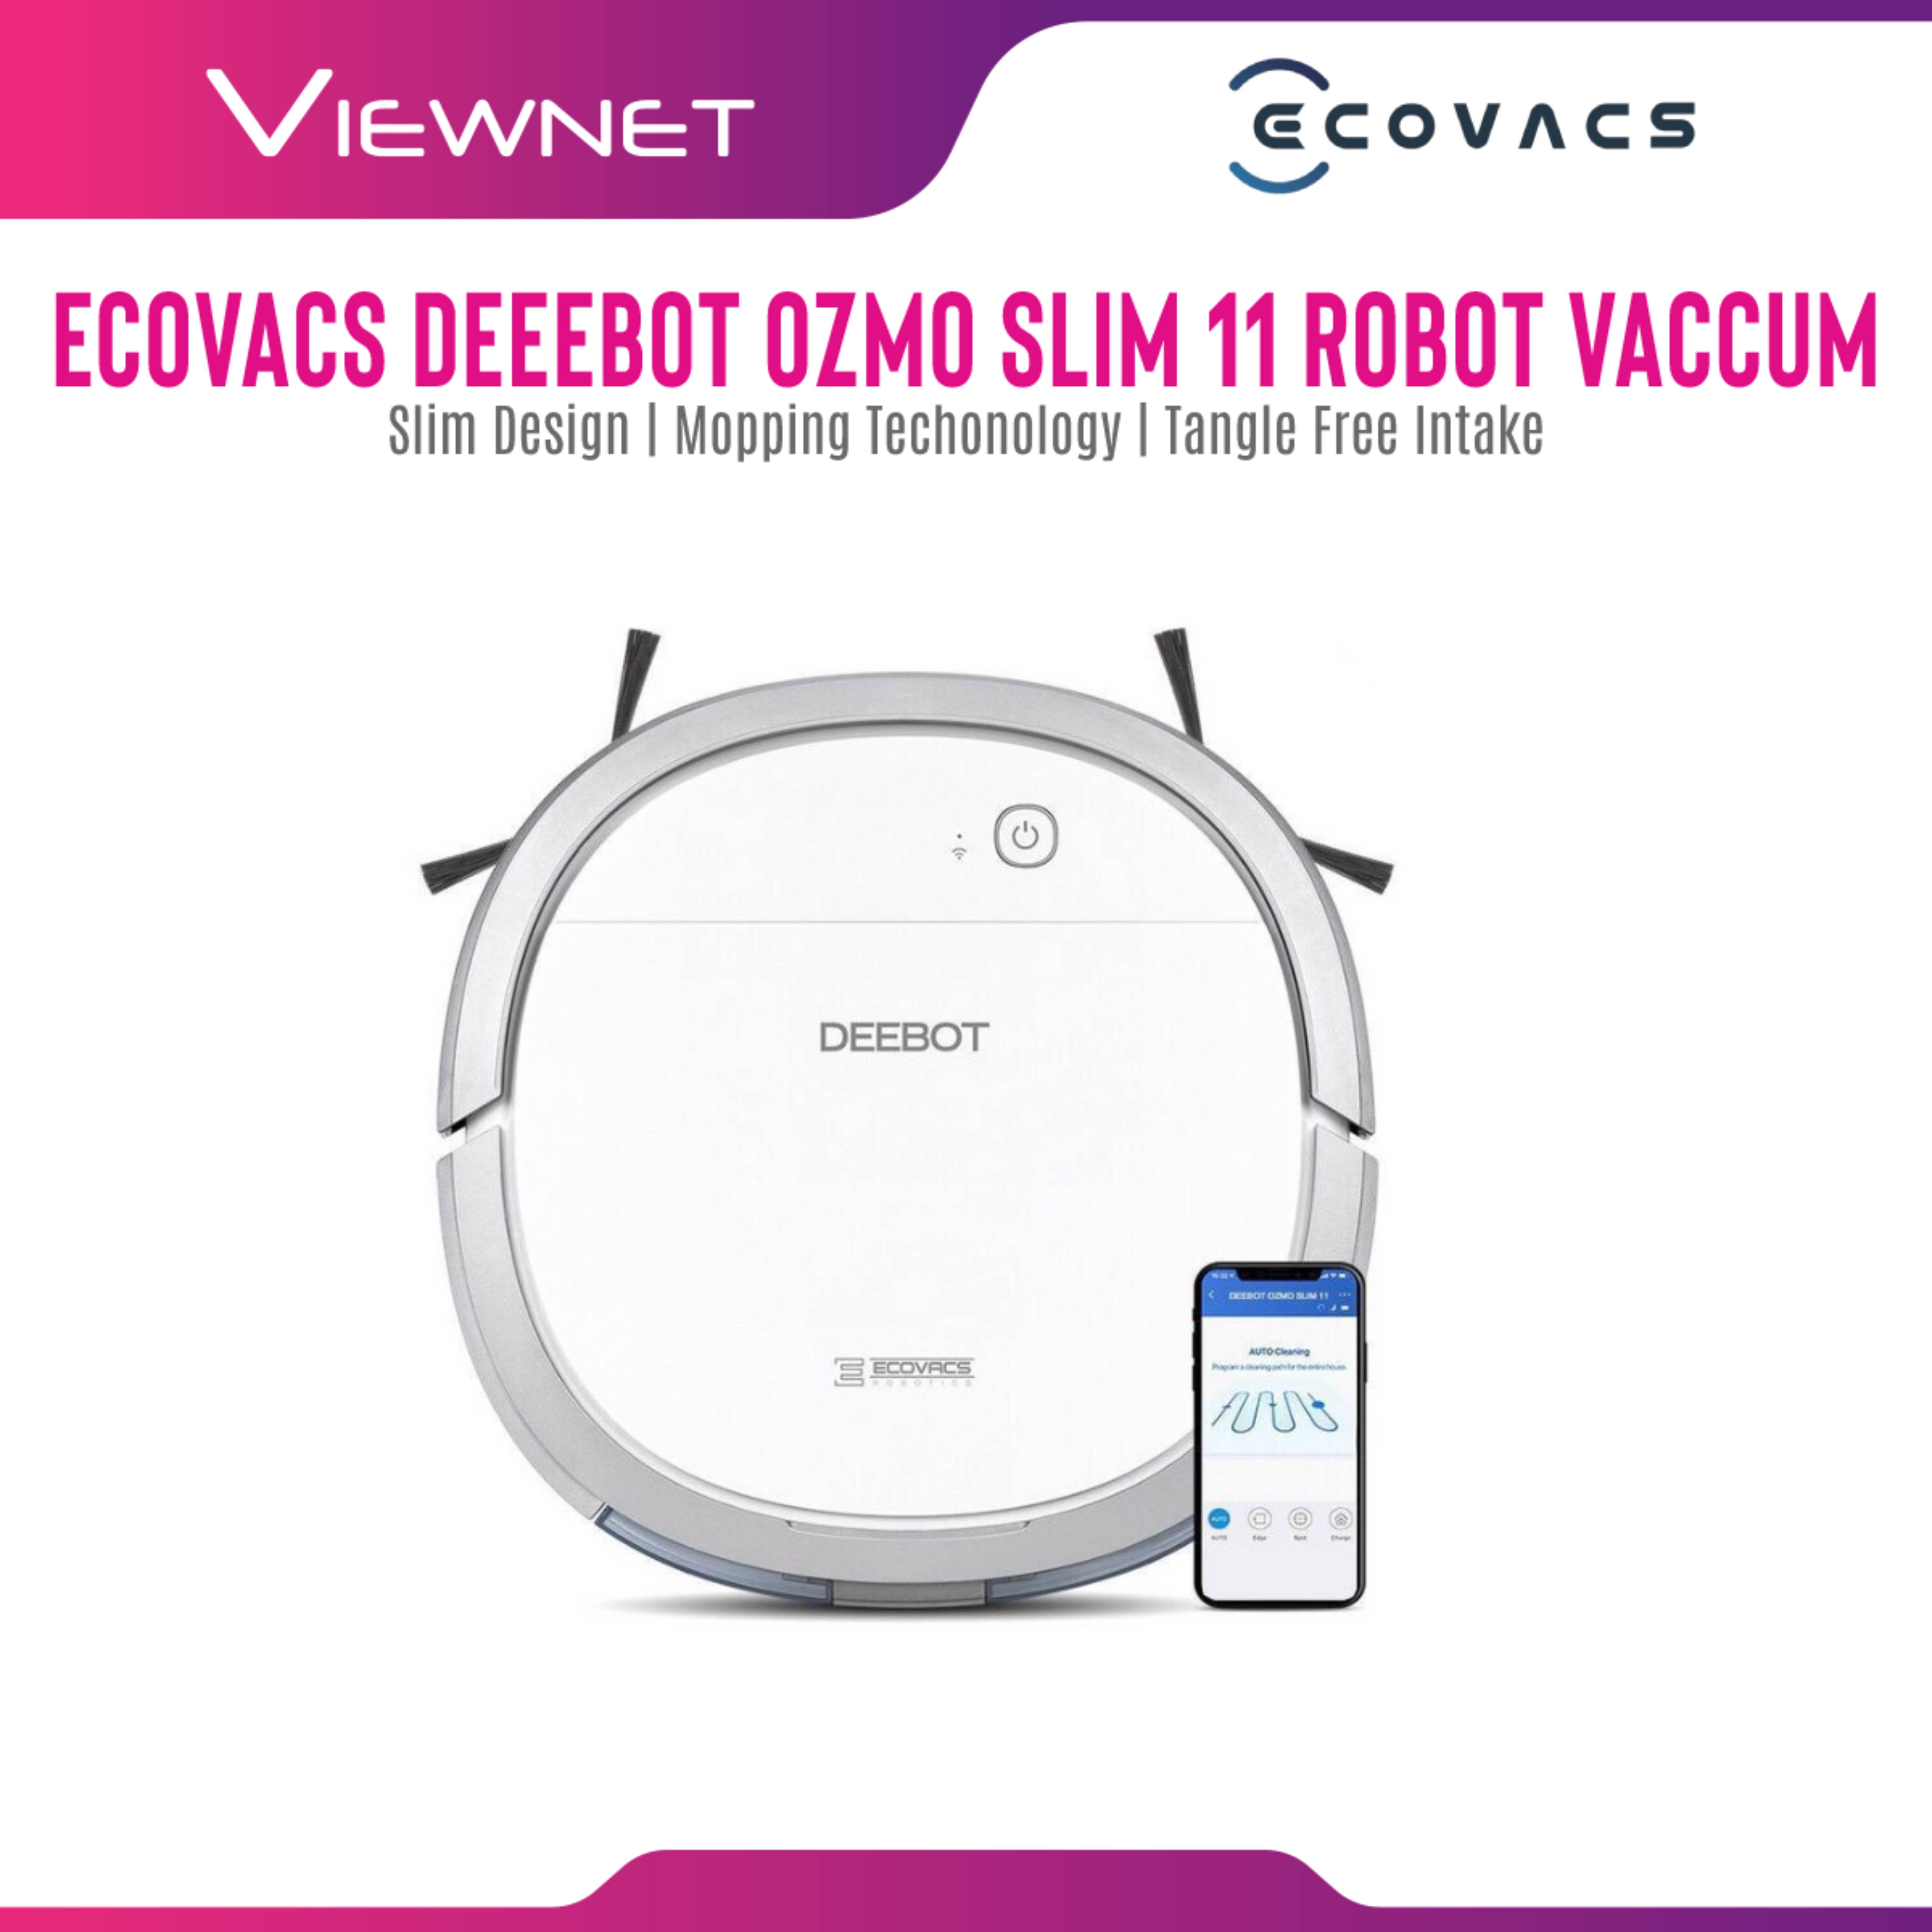 ECOVACS DEEBOT OZMO Slim11 Robot Vacuum Cleaner with Low Profile Design OZMO Mopping Technology Tangle-Free Intakeã€Local Shipping&1 Year Local Warrantyã€‘